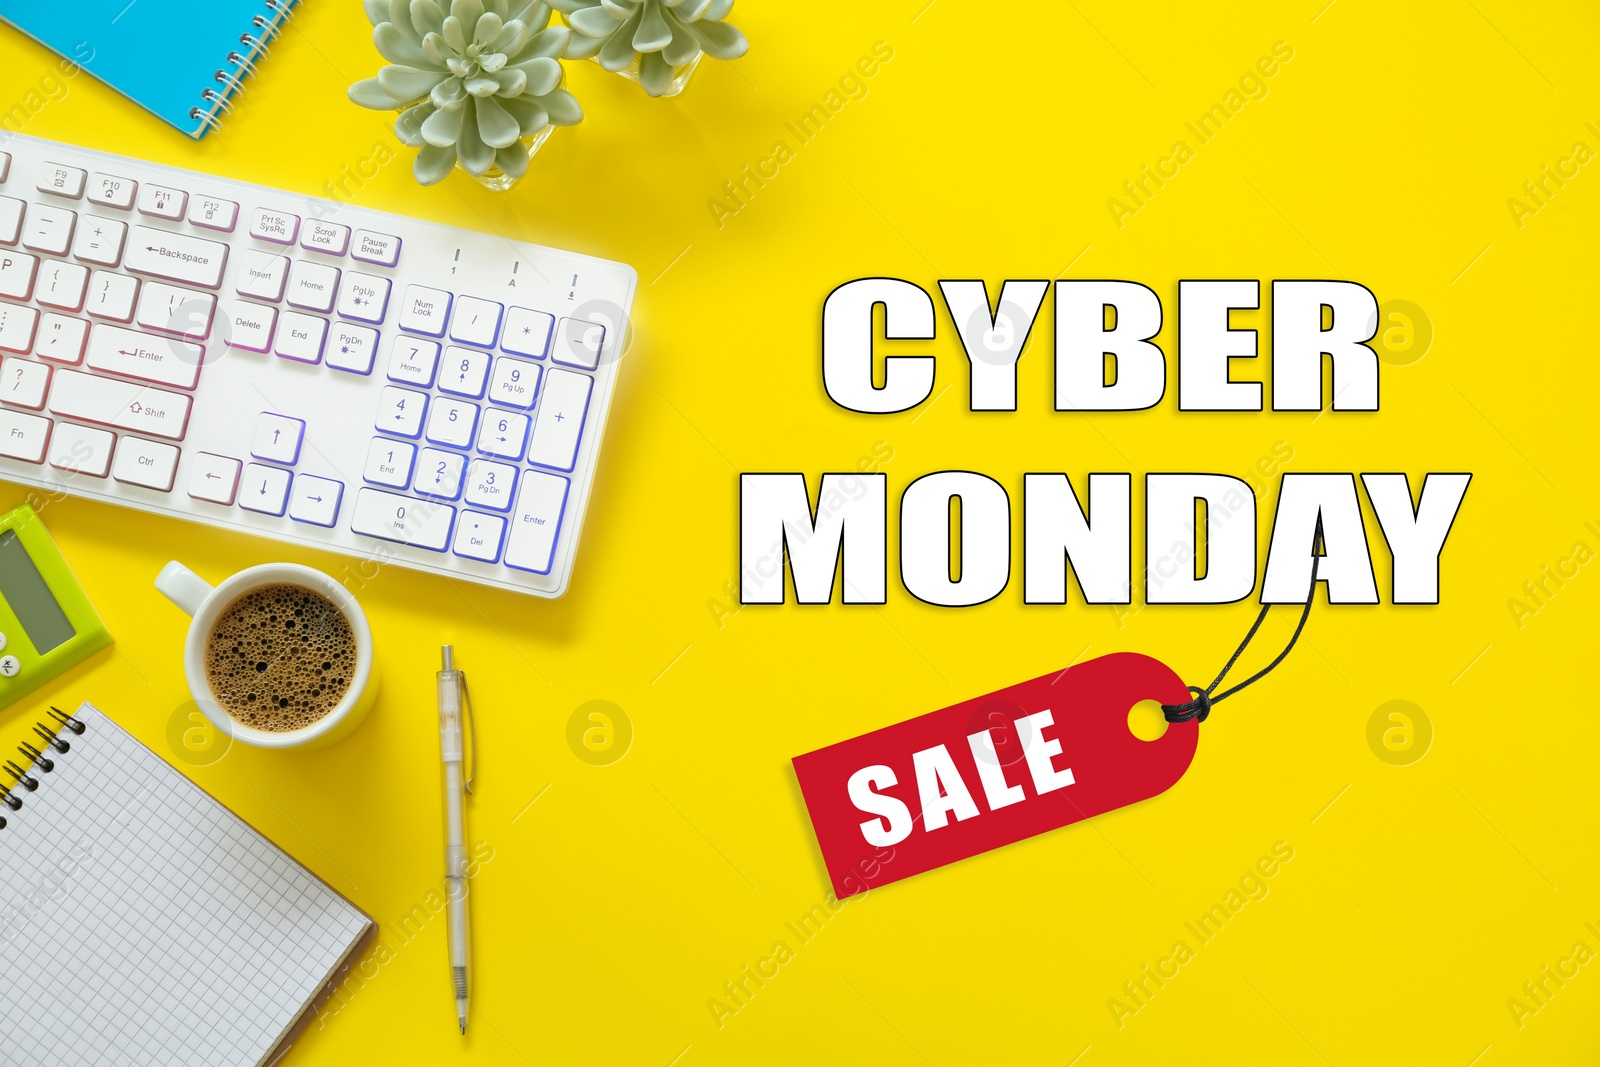 Image of Cyber Monday Sale. Modern keyboard and stationery on yellow background, flat lay